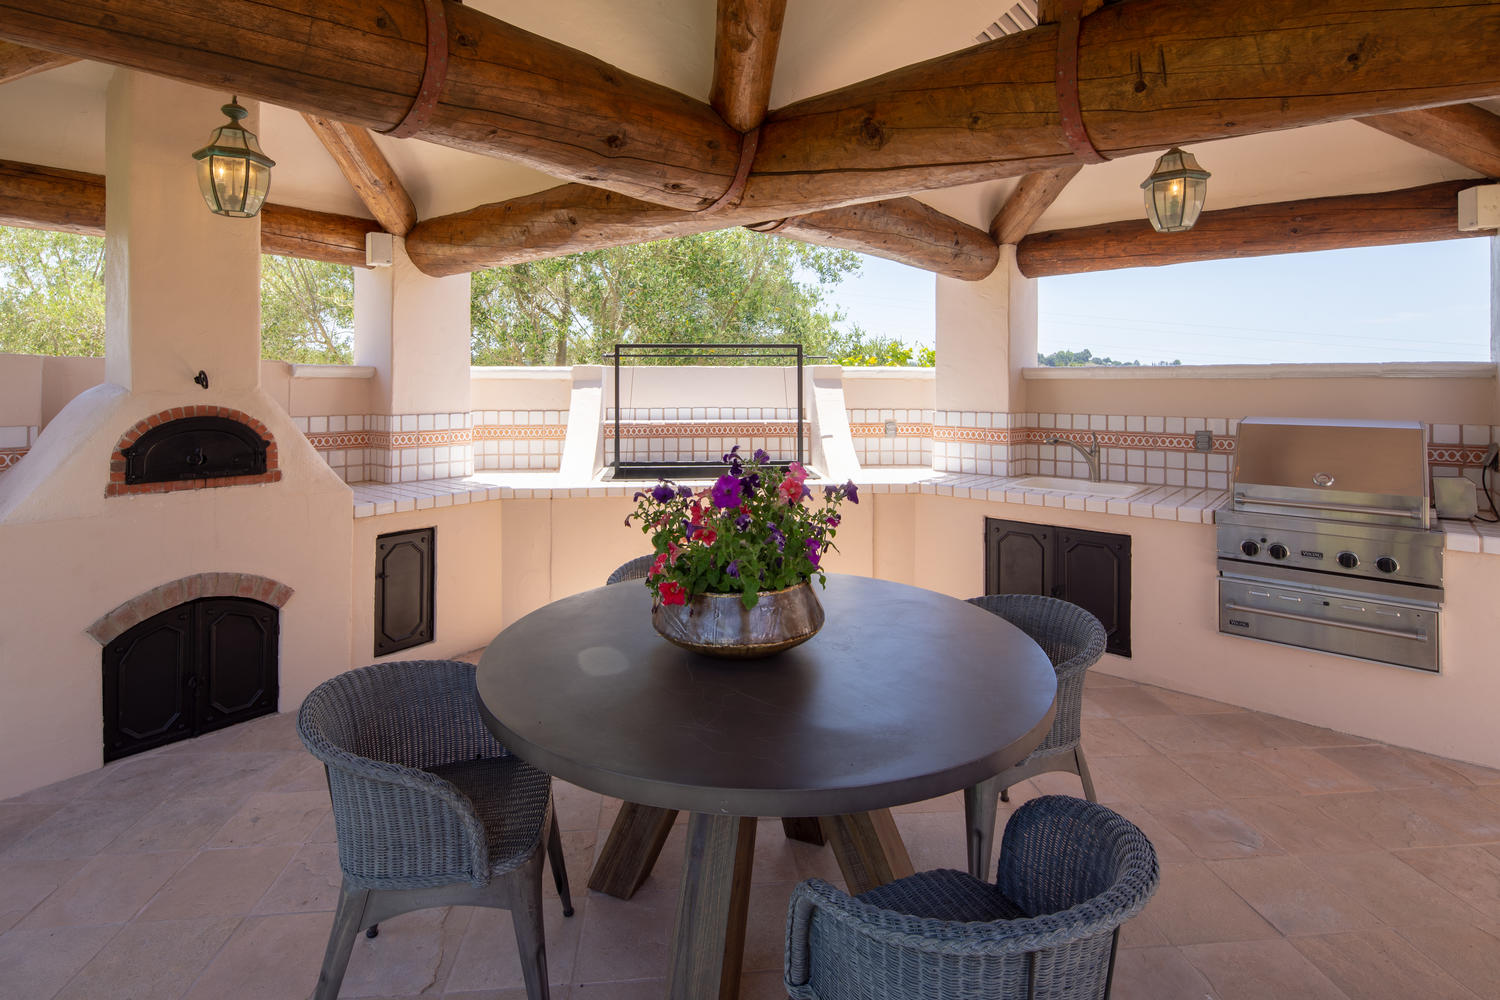 2520 Nightshade Place-large-046-38-Outdoor Dining  BBQ Area-1500x1000-72dpi.jpg